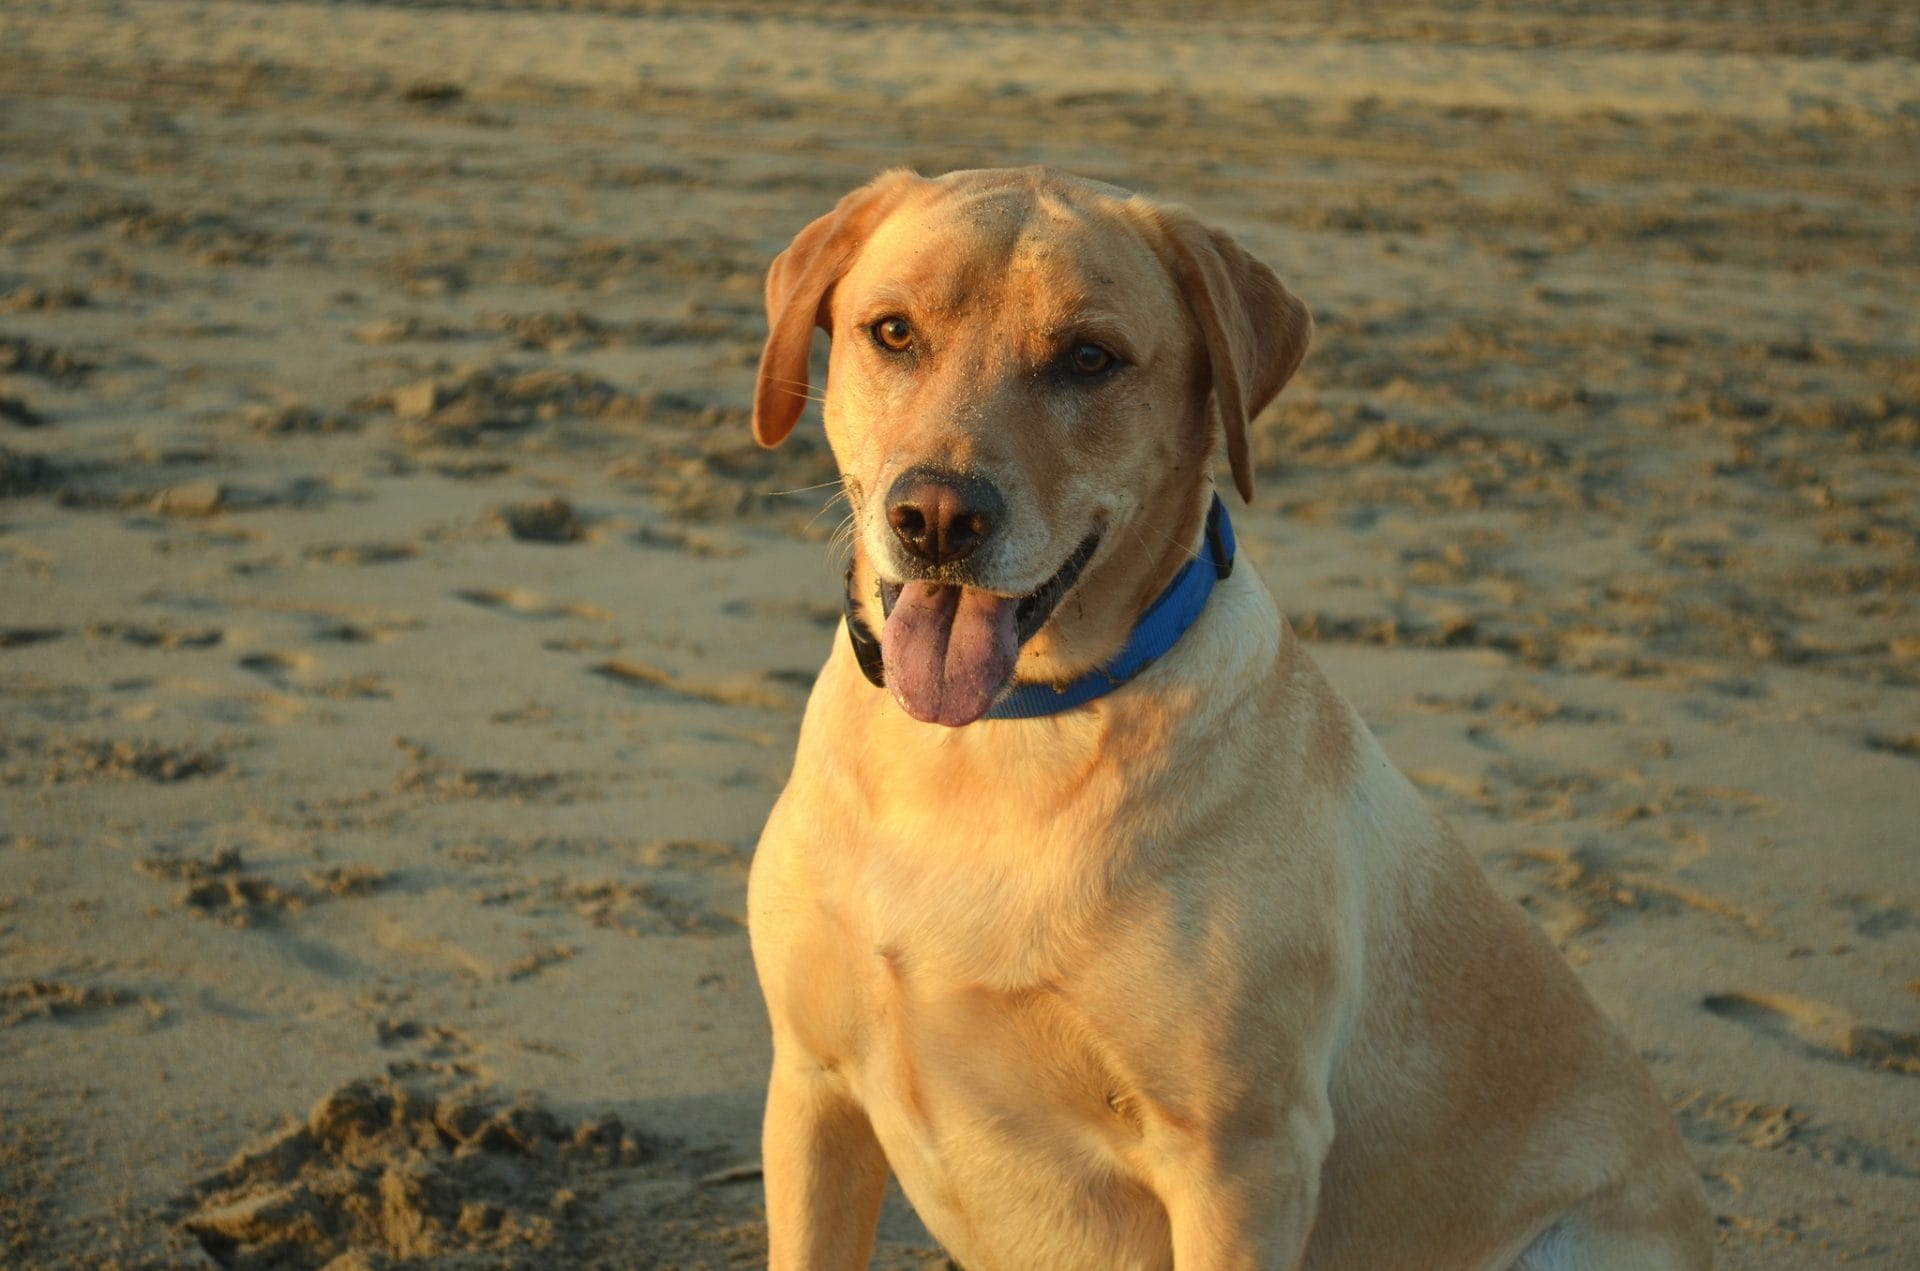 There are several great dog beaches and parks in San Francisco for dogs and their humans. Photo via Creative Commons.